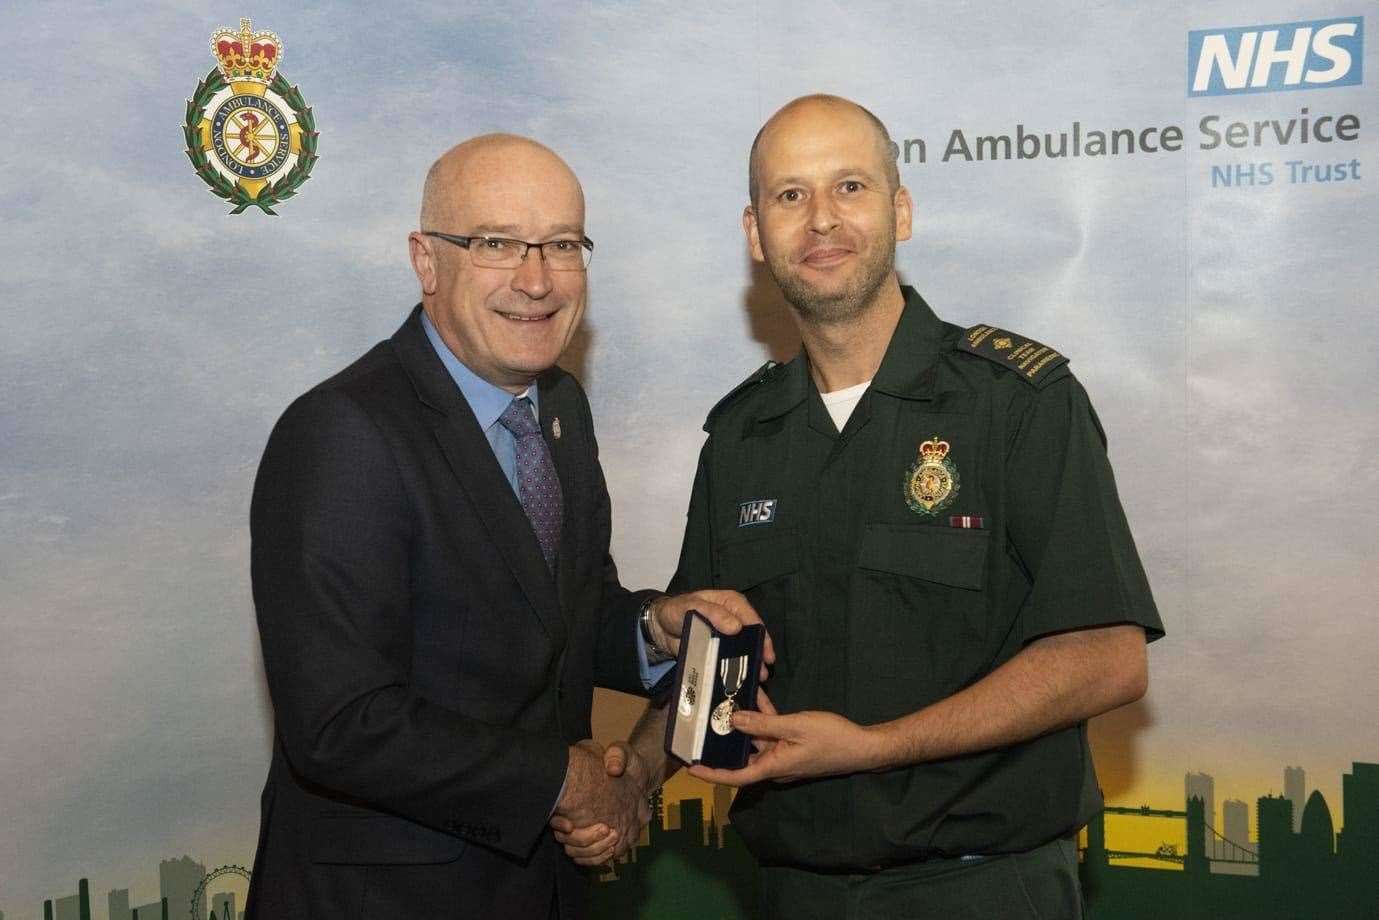 Alan Gurling recently received a good conduct medal for 30 years service to the NHS.